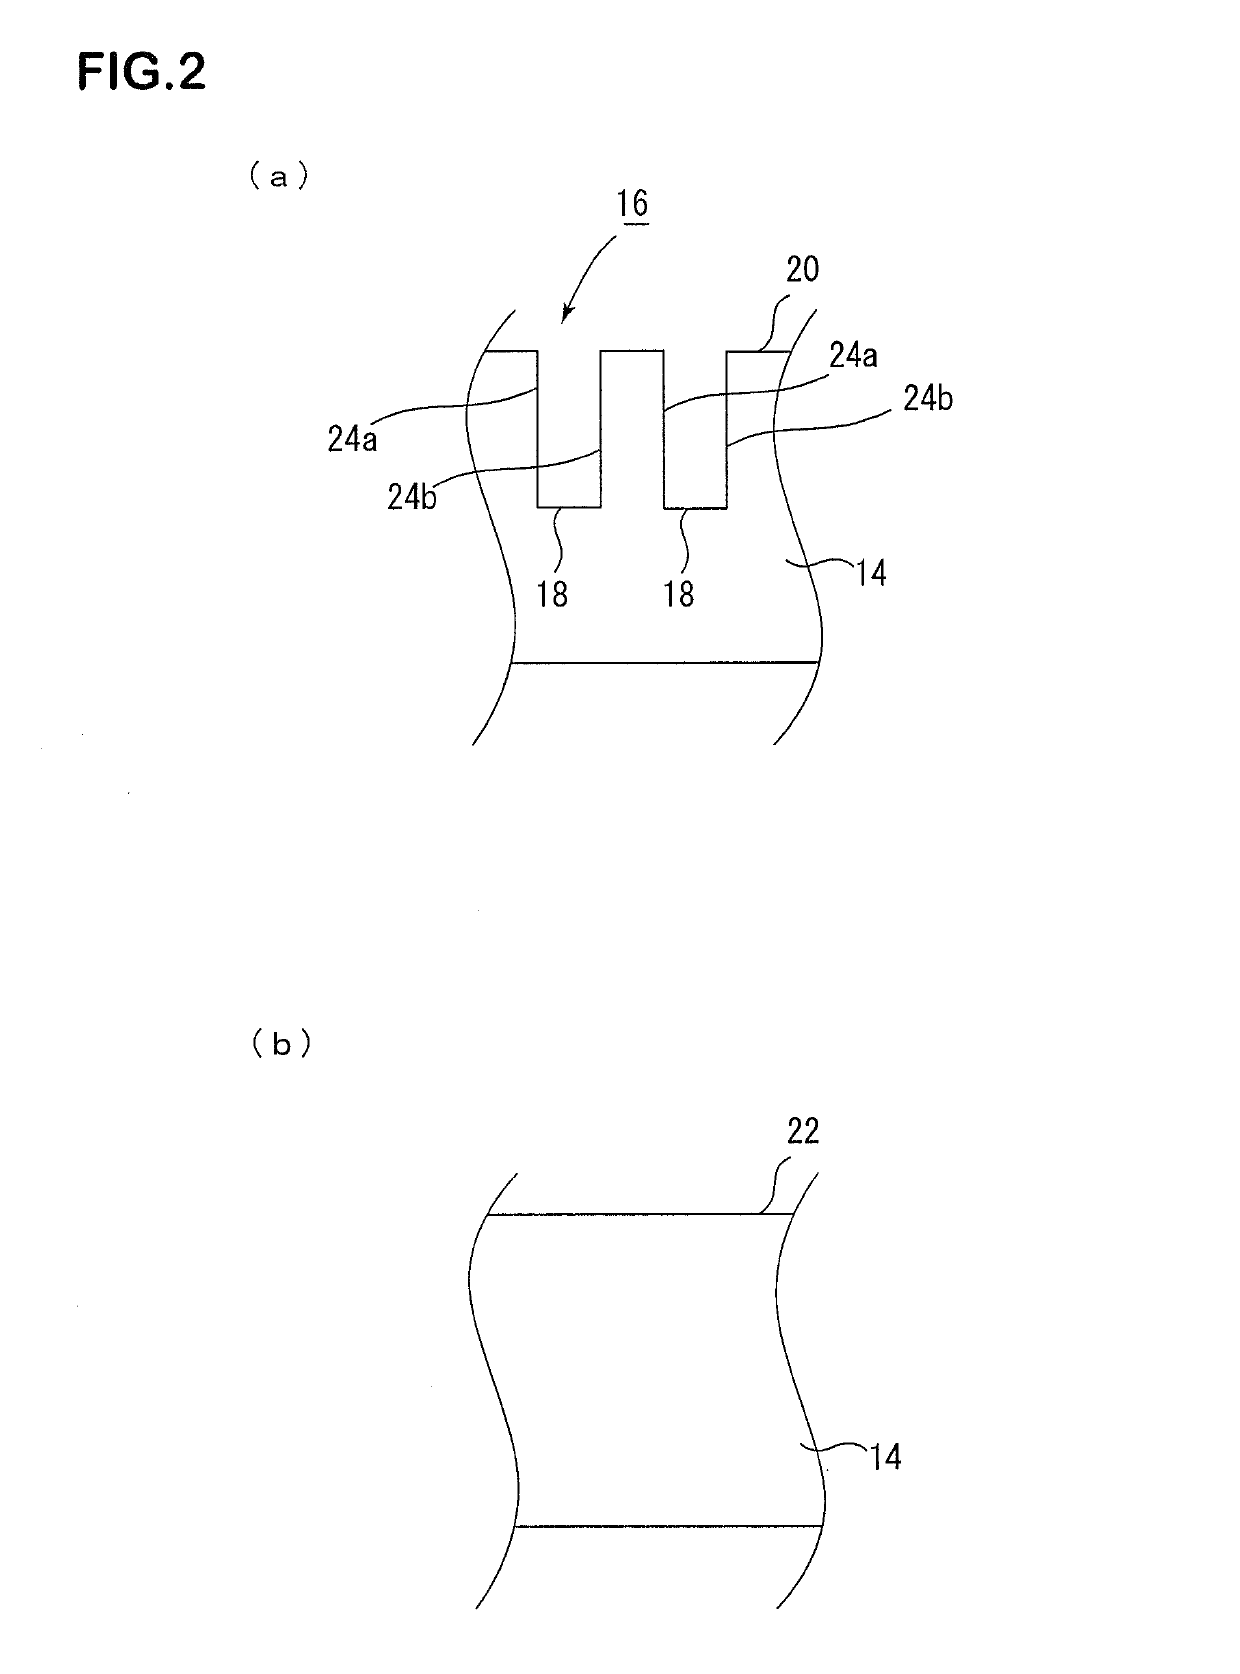 Quartz glass member with increased exposed area, method for manufacturing same, and blade with multiple peripheral cutting edges